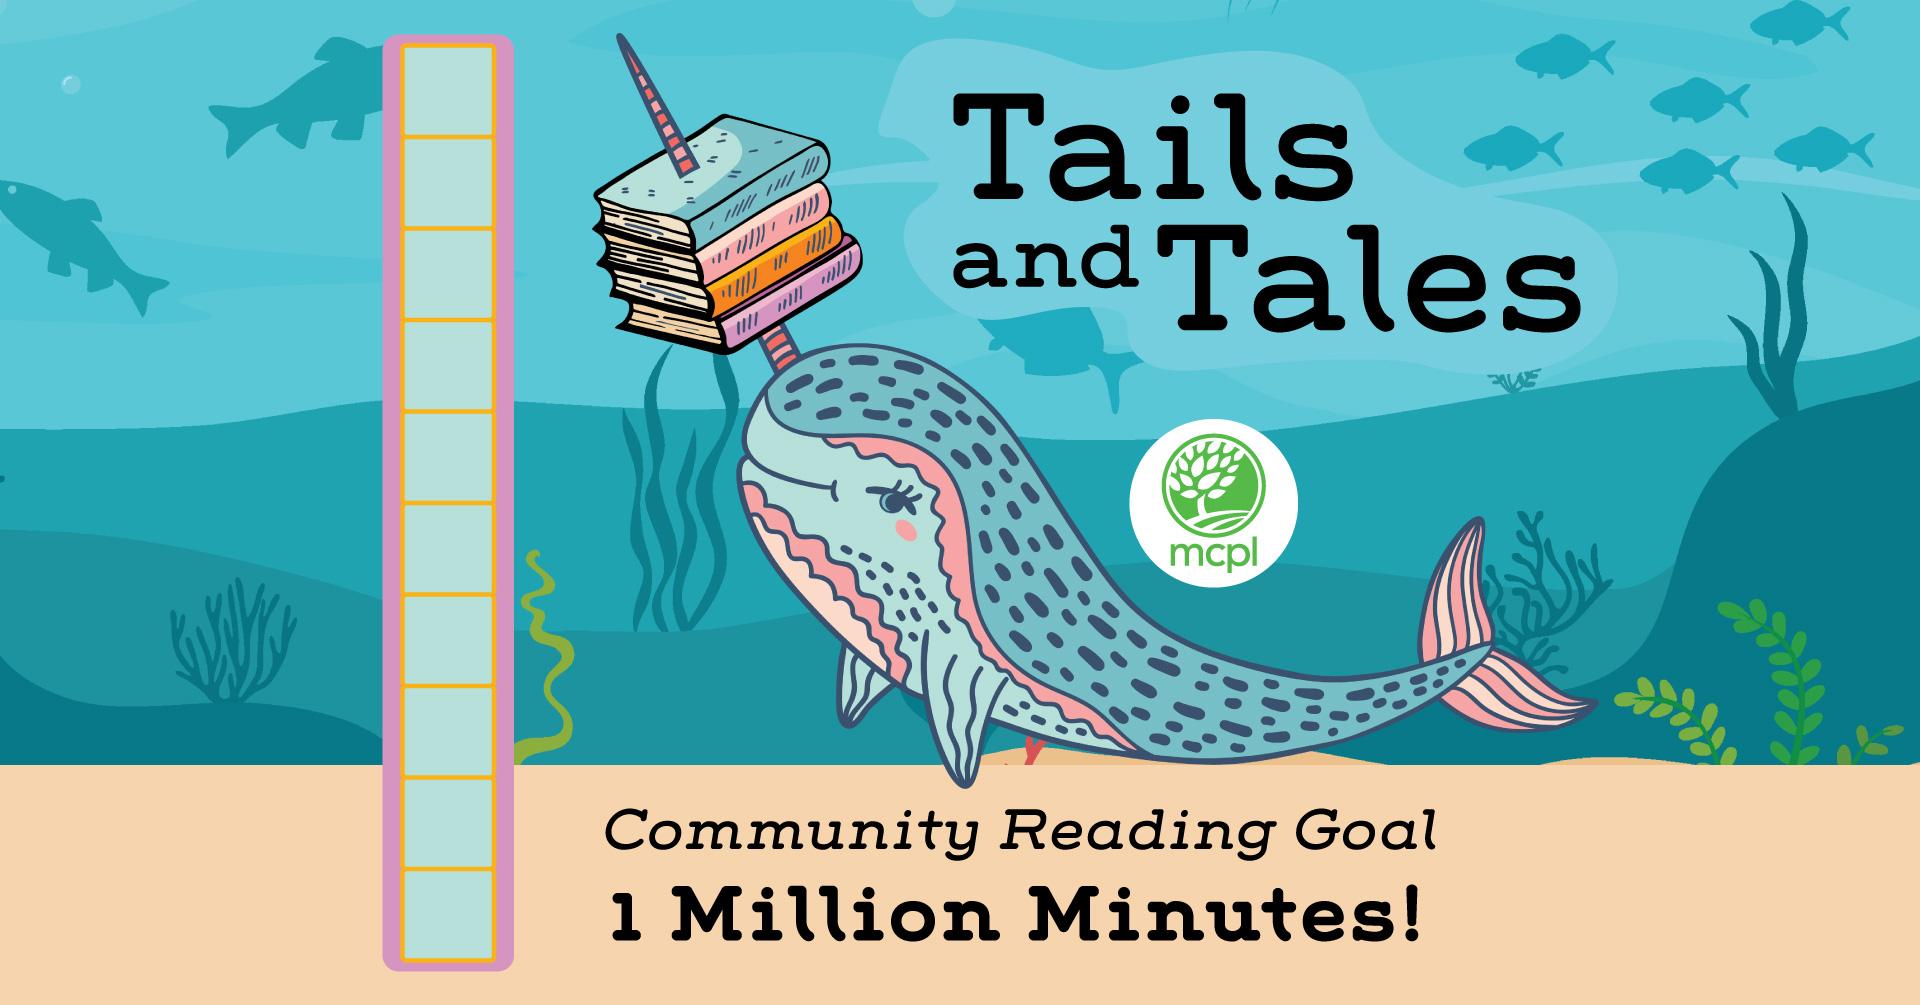 Tails and Tales Community Reading Goal 1 Million Minutes